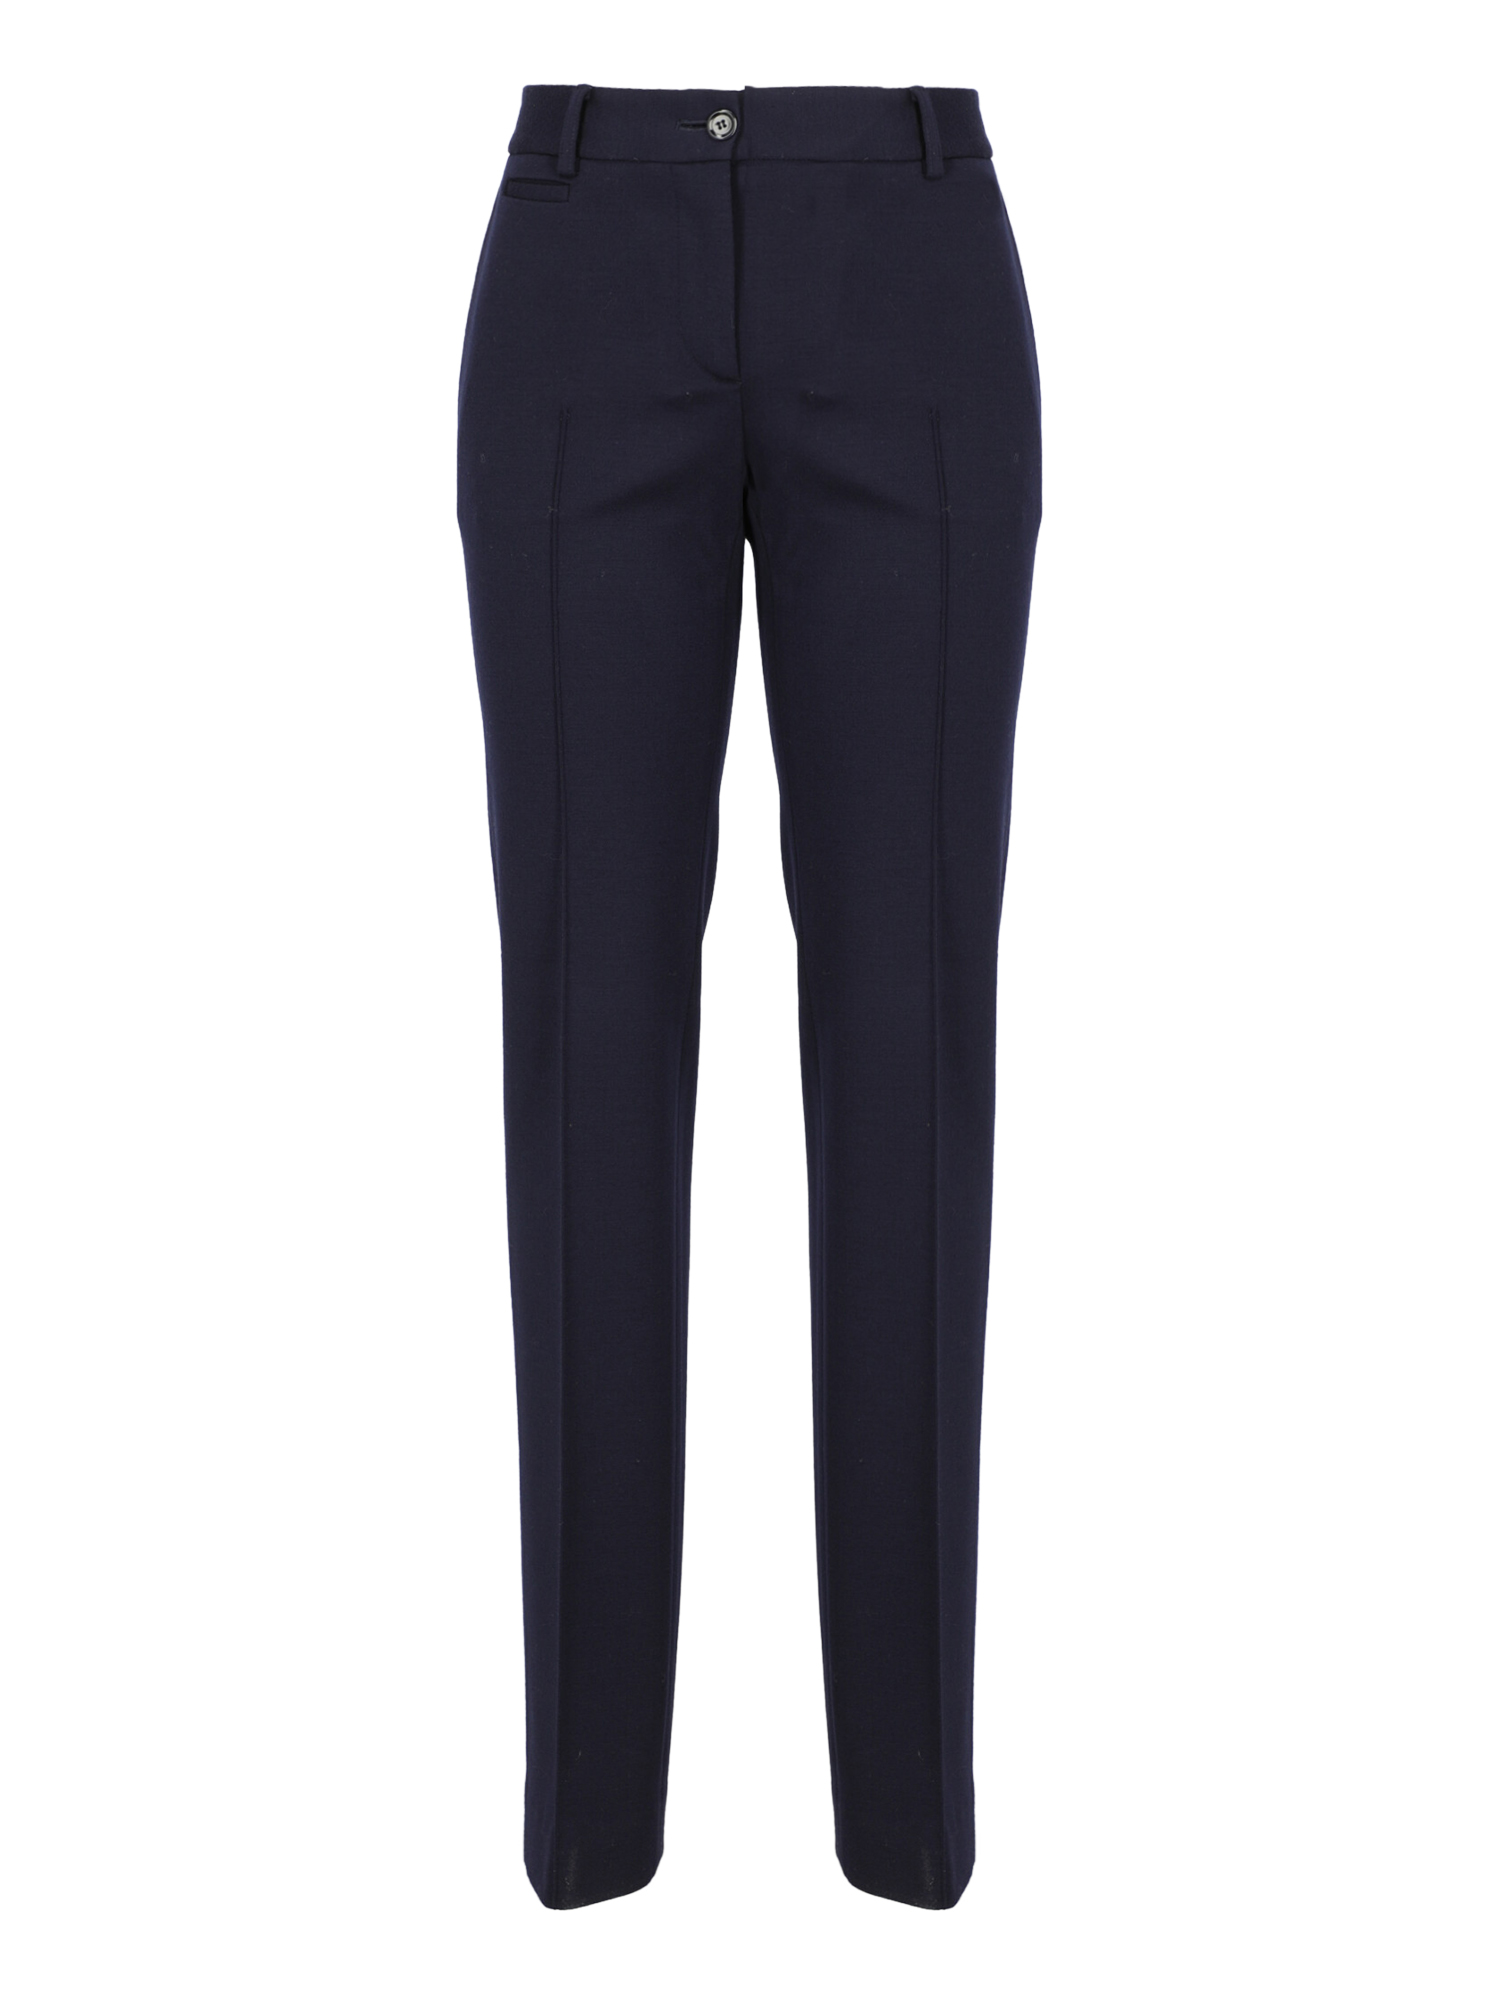 Pantalons Pour Femme - Moschino - En Wool Navy - Taille:  -